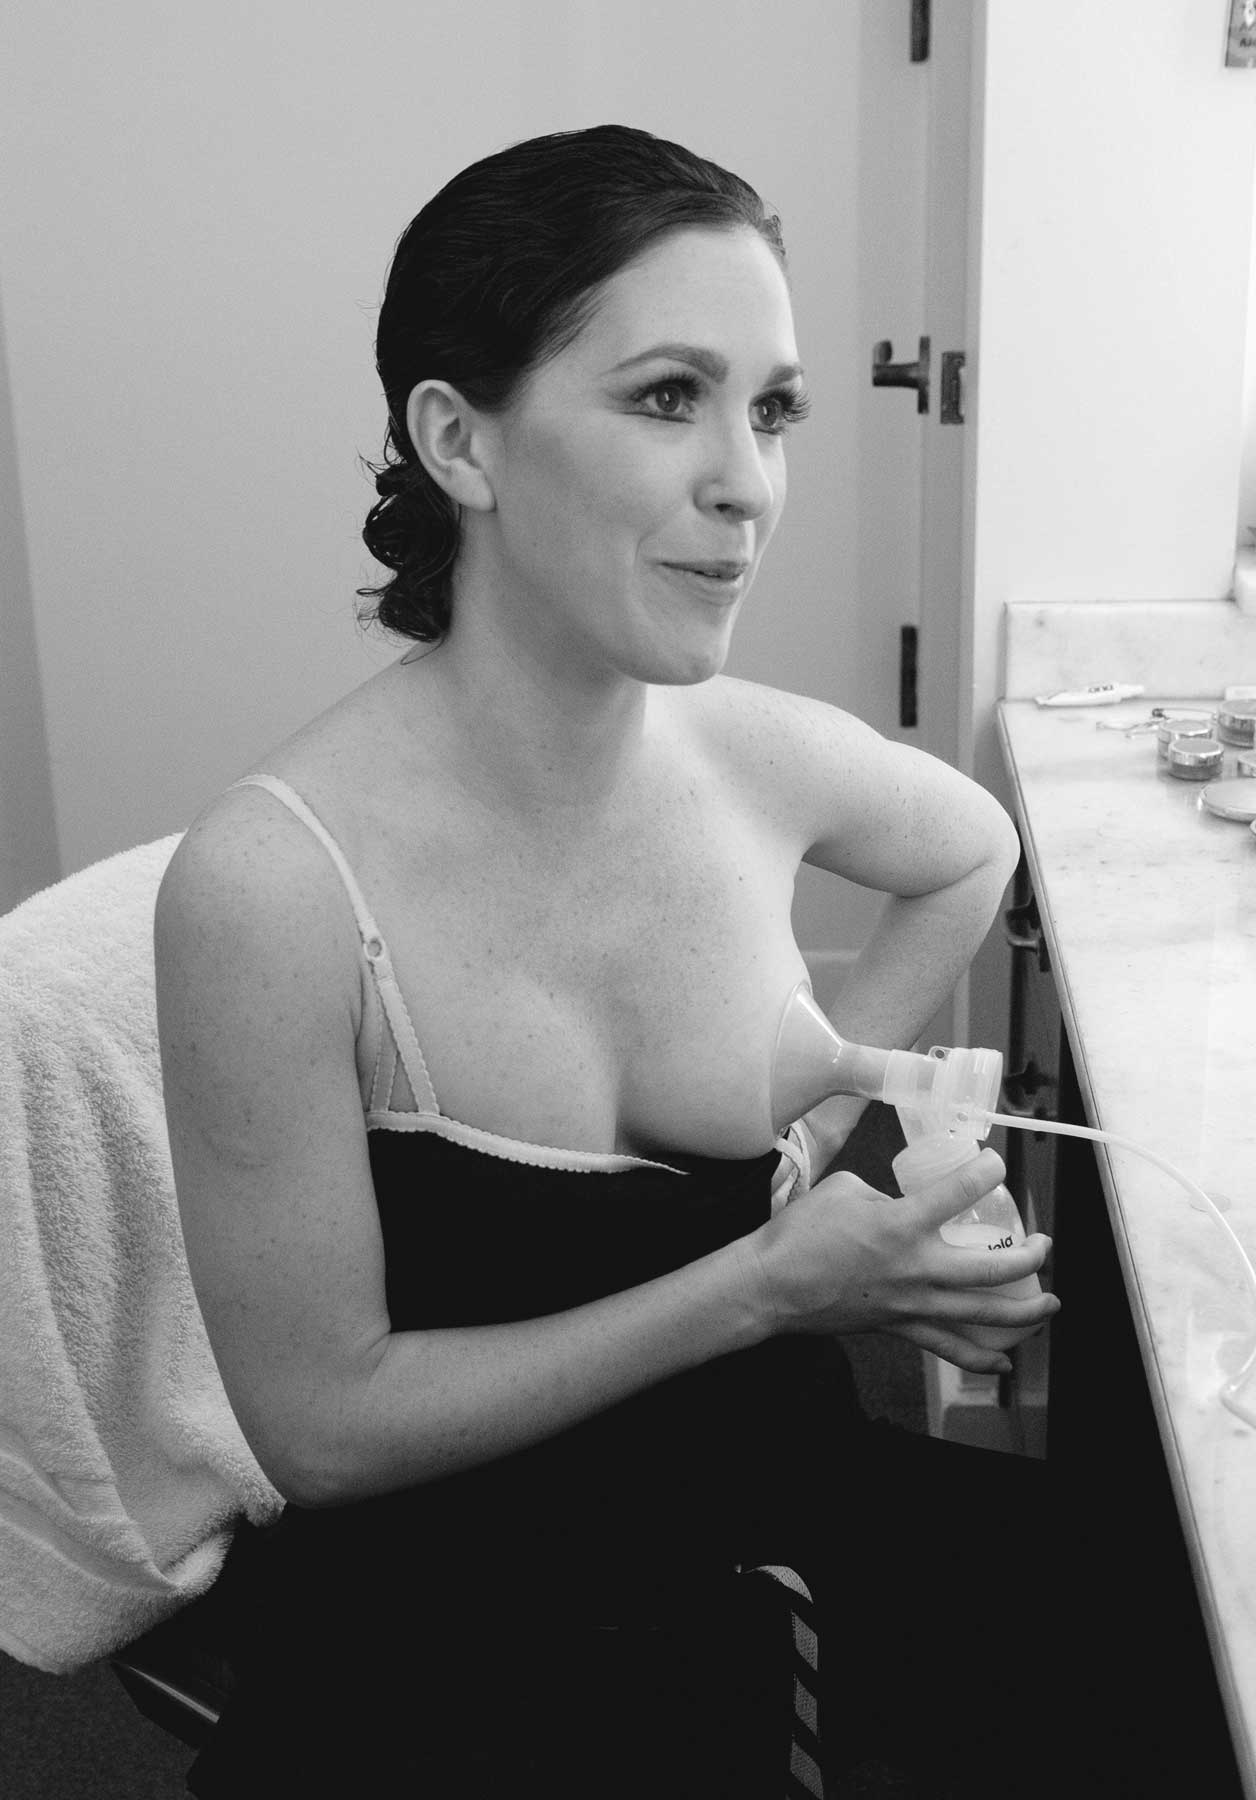 Kristin has received the ten-minute warning before her performance, so she pumps milk in her dressing room. 2009. Balancing Acts: Three Prima Ballerinas Becoming Mothers.